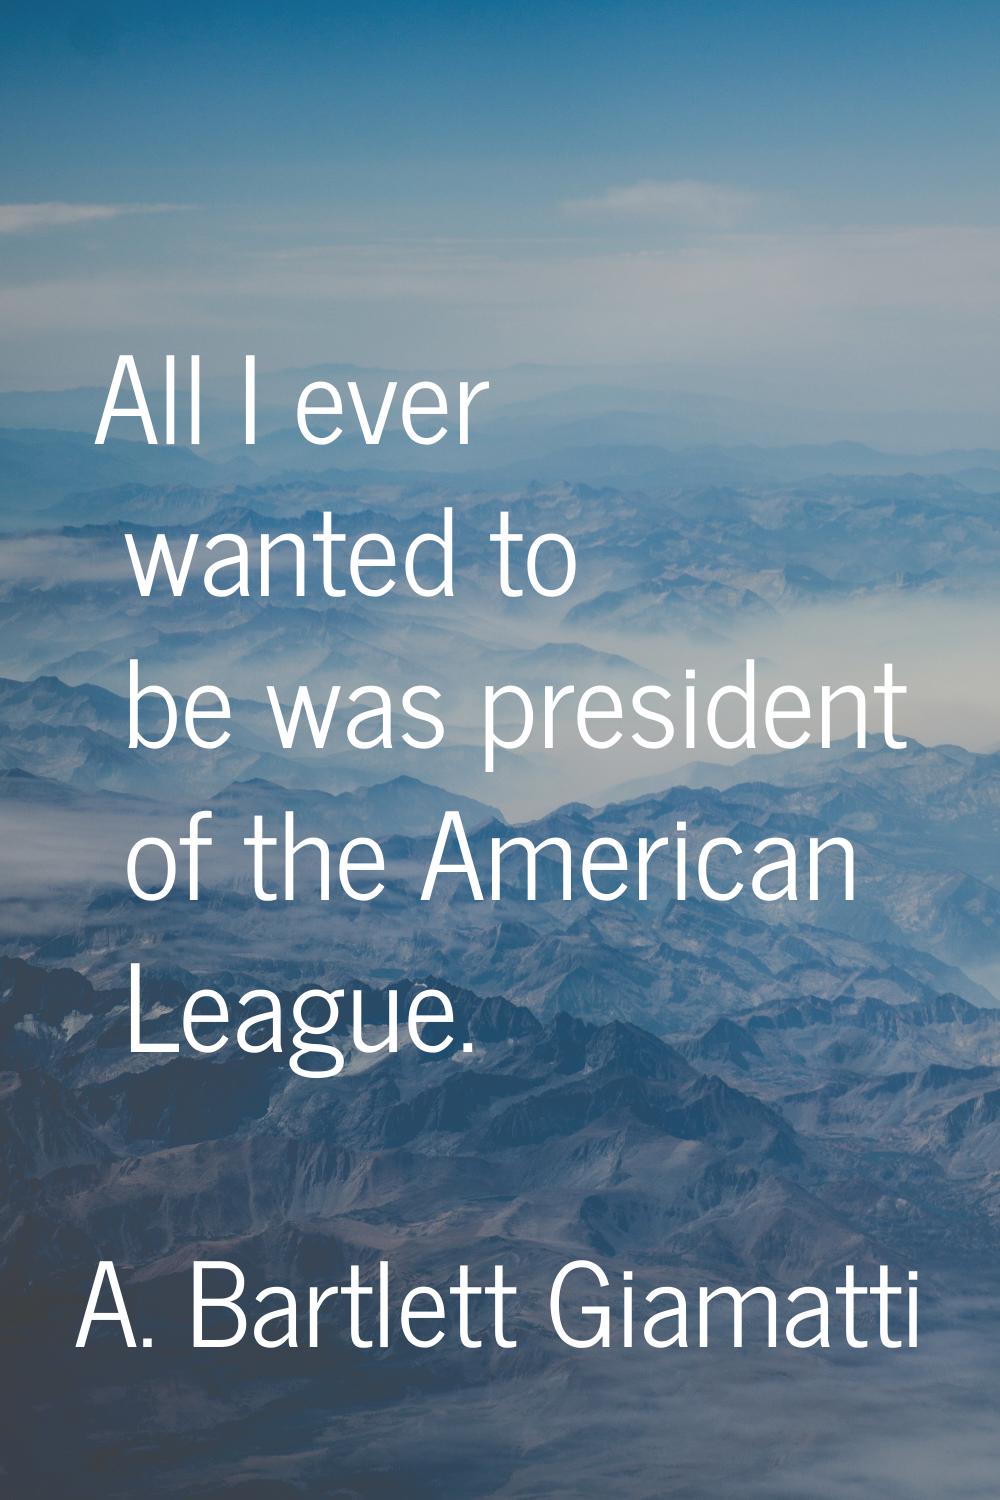 All I ever wanted to be was president of the American League.